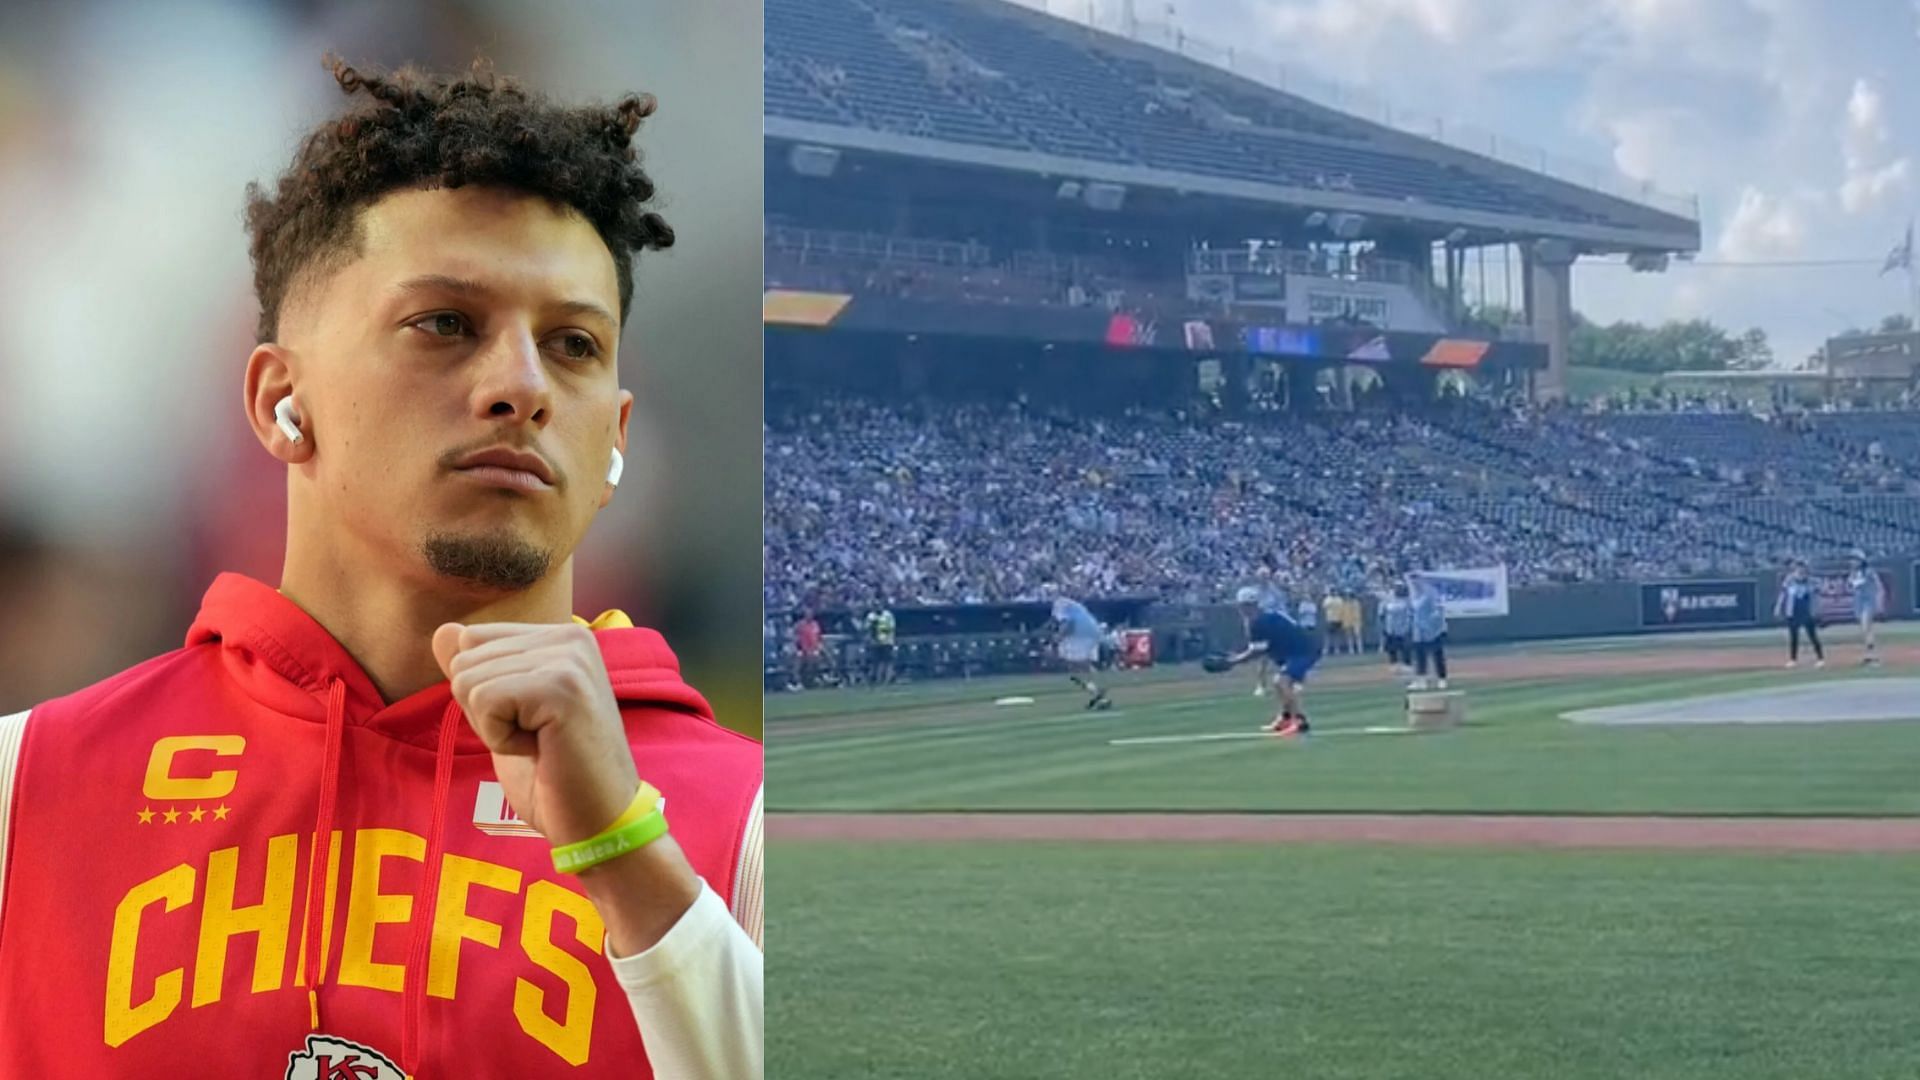 Patrick Mahomes makes behind the back throw to 1st base in celebrity softball game